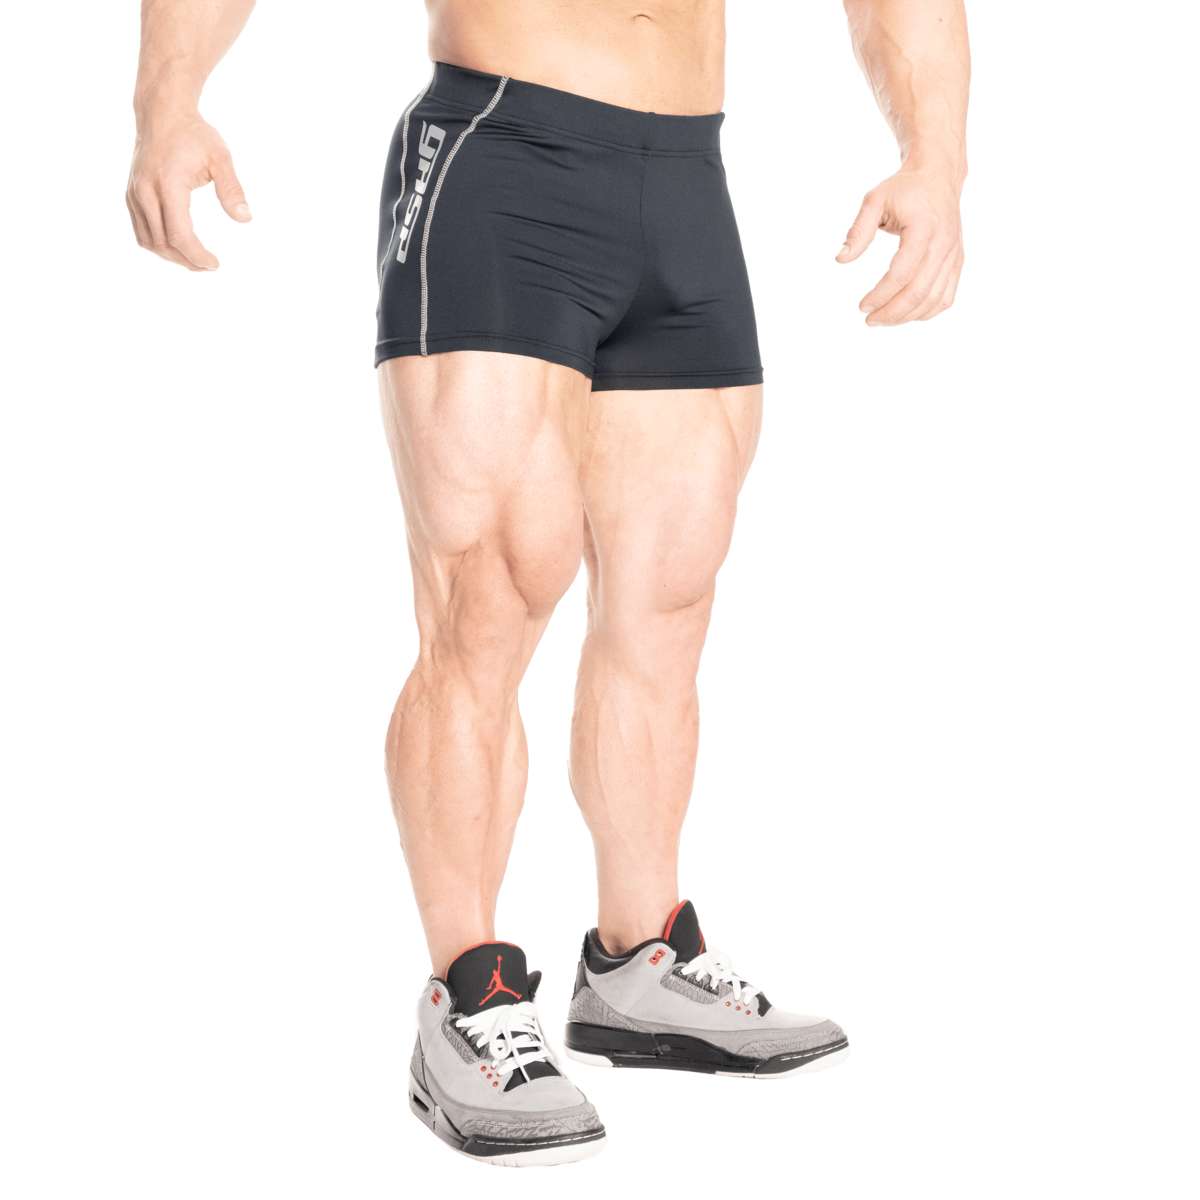 Bodybuilding Posing Trunks - Indias Most Trusted Online Supplement Store